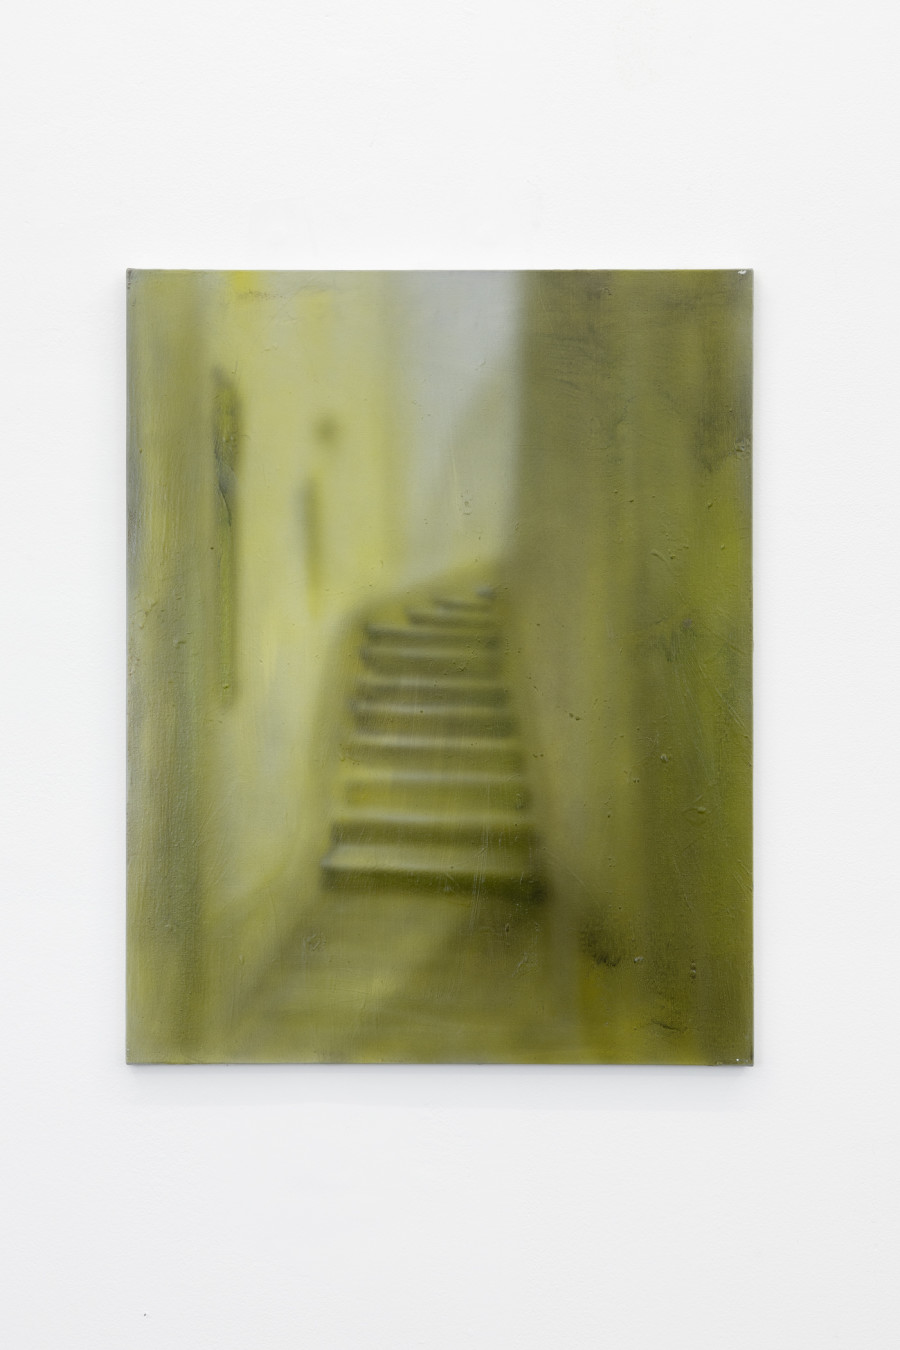 Will Sheldon, Untitled (Yellow II), 2022, Airbrushed acrylic on canvas, 76 × 63.5 cm. Courtesy: Weiss Falk and the Artist. Photo: Gina Folly